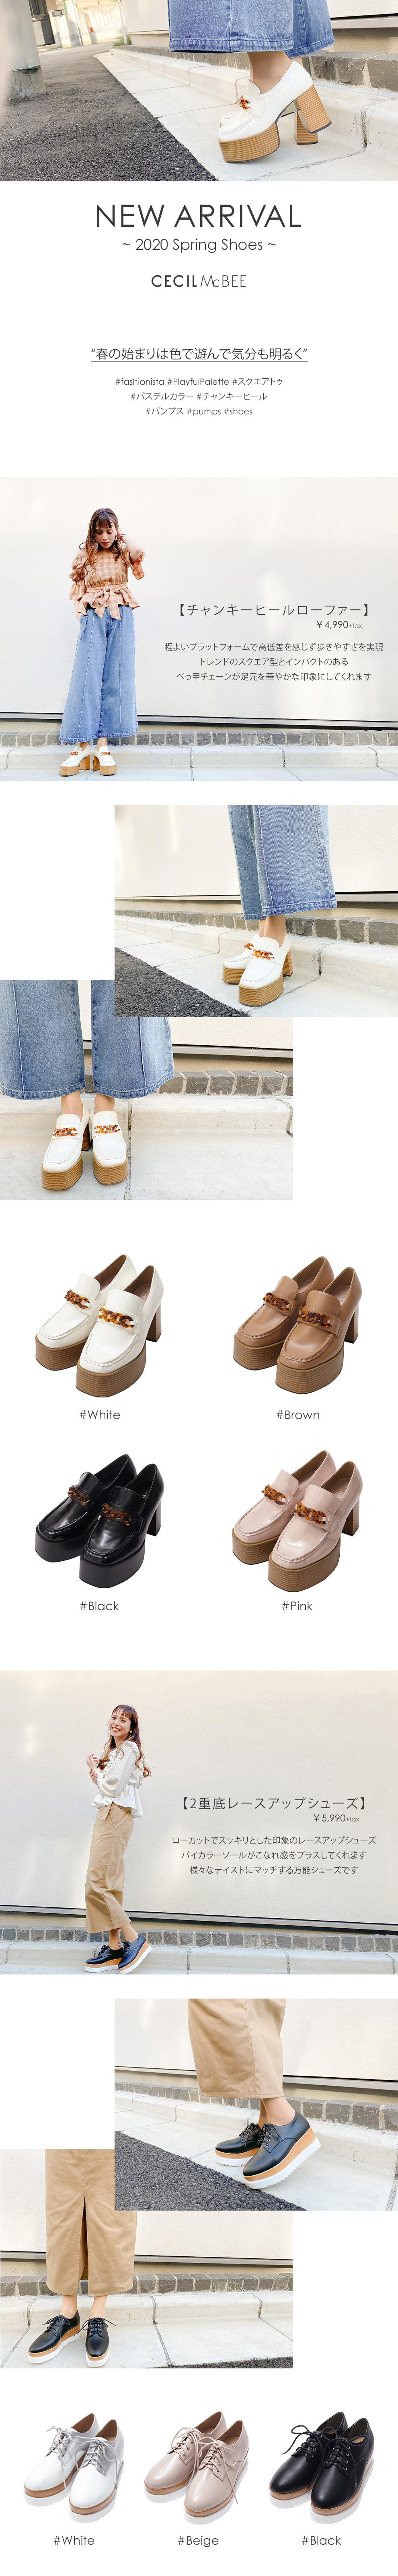 NEW ARRIVAL -2020 Spring Shoes-